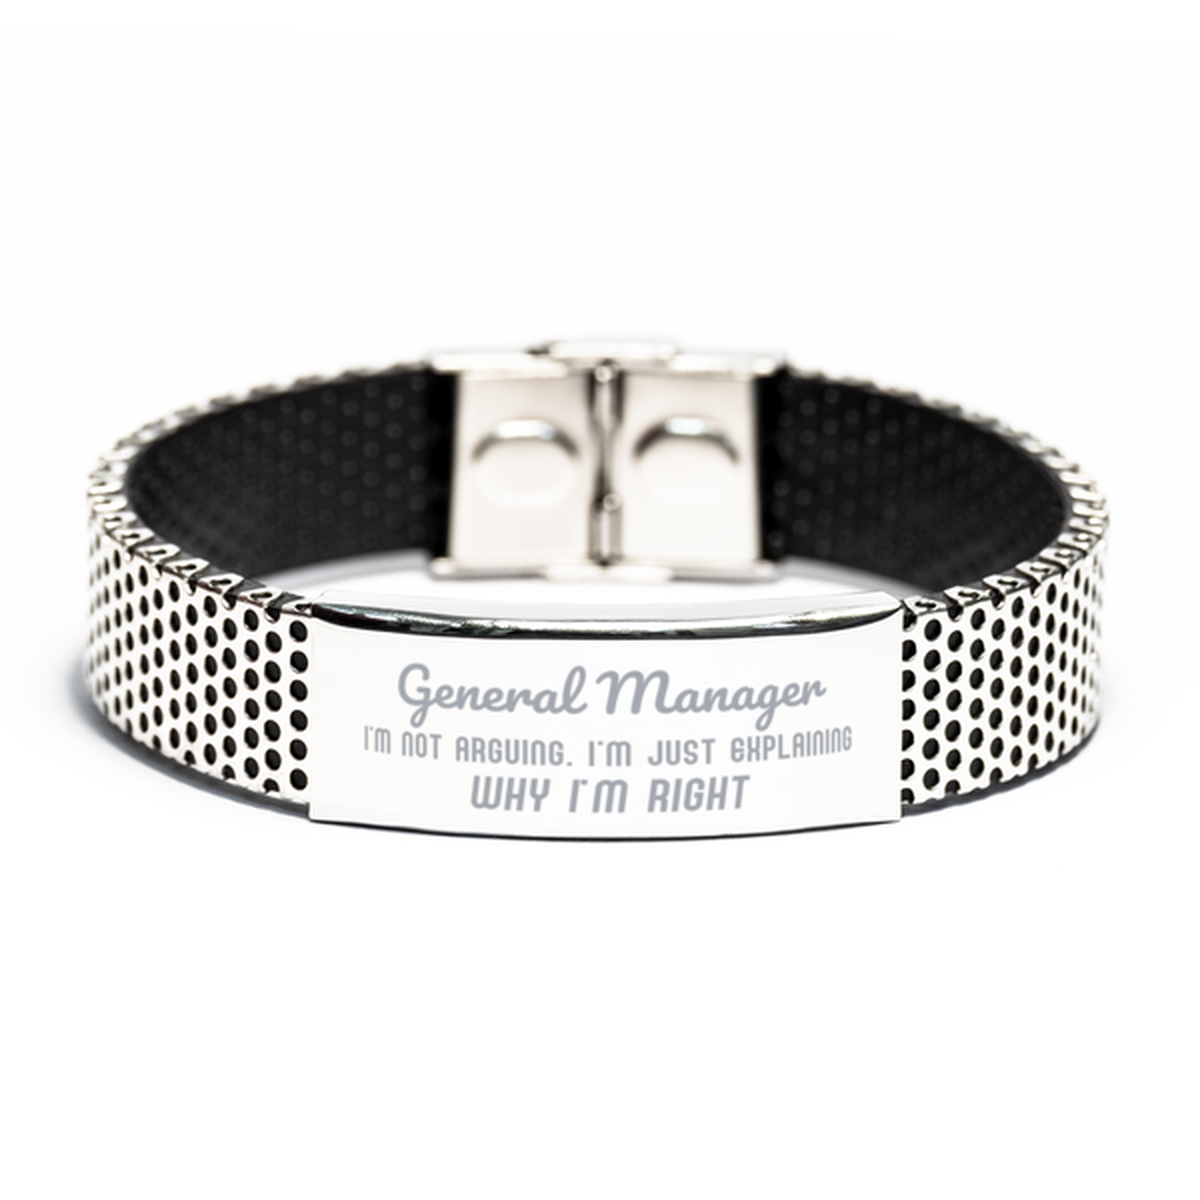 General Manager I'm not Arguing. I'm Just Explaining Why I'm RIGHT Stainless Steel Bracelet, Funny Saying Quote General Manager Gifts For General Manager Graduation Birthday Christmas Gifts for Men Women Coworker